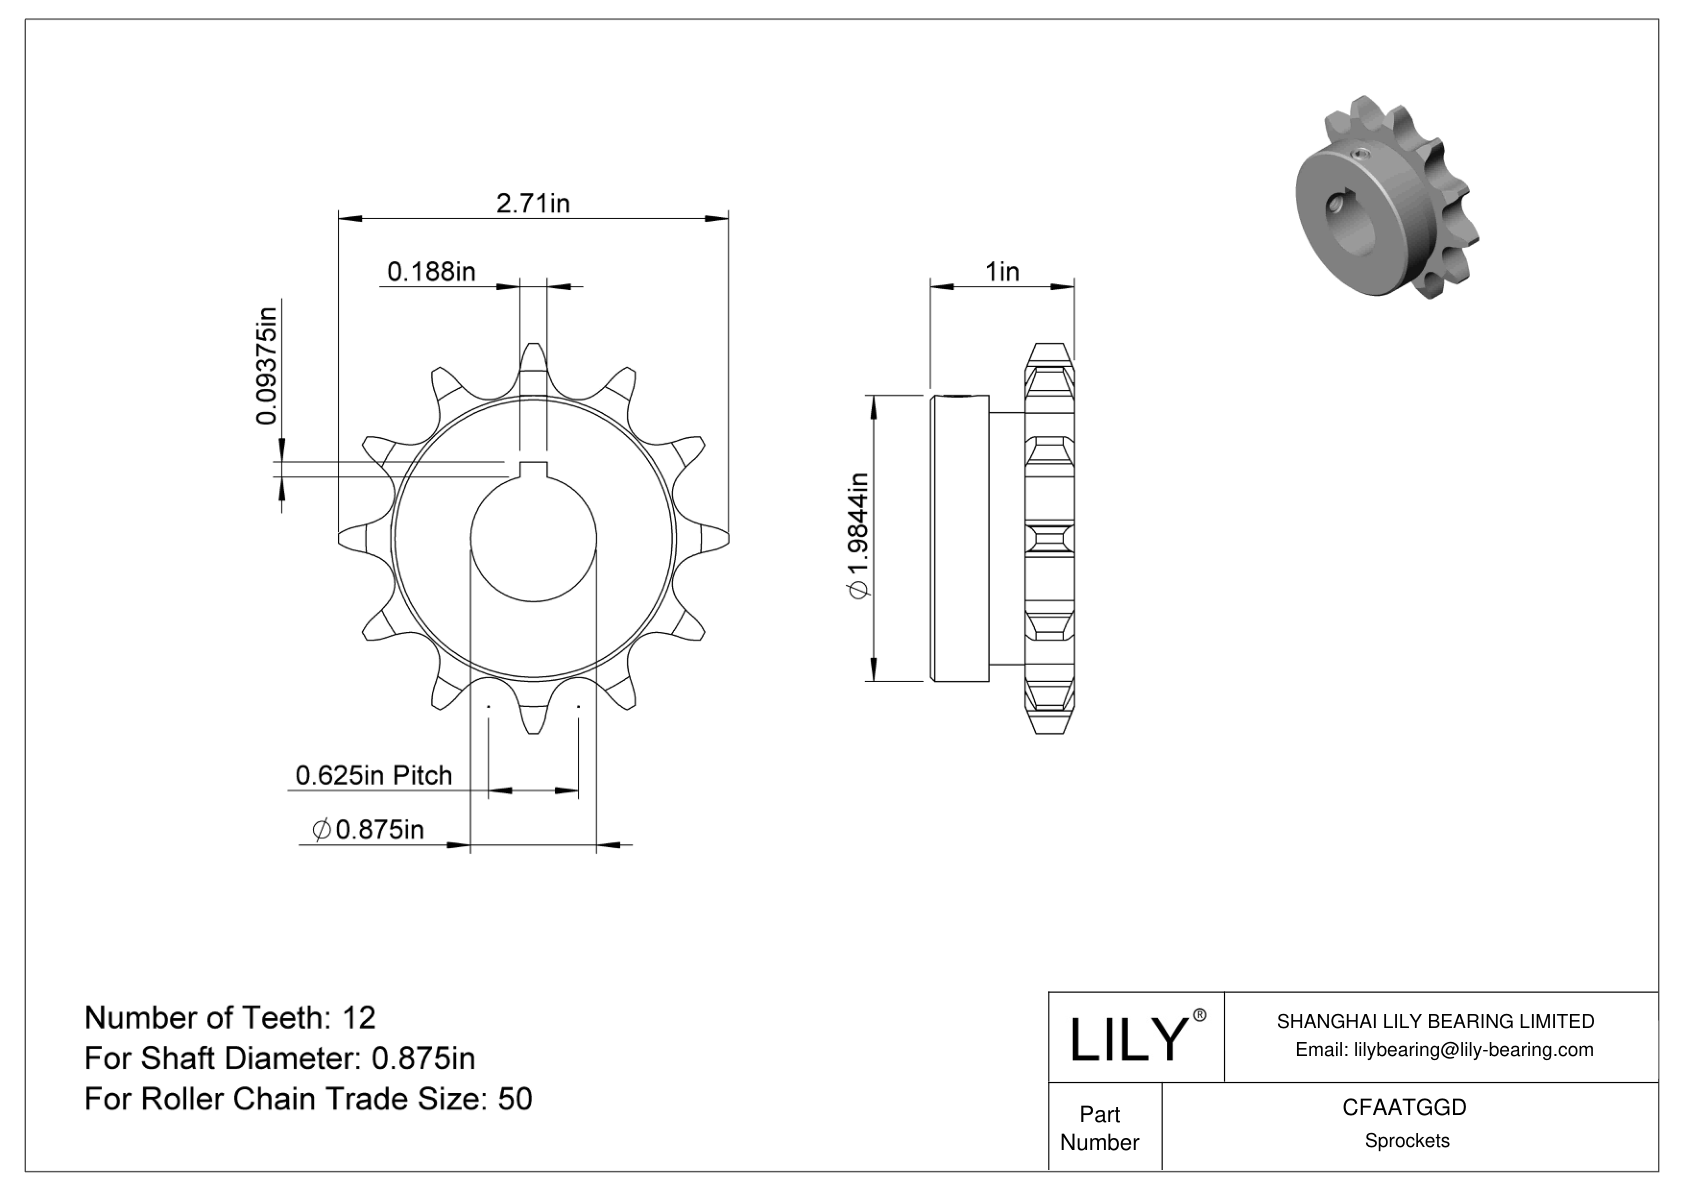 CFAATGGD Wear-Resistant Sprockets for ANSI Roller Chain cad drawing